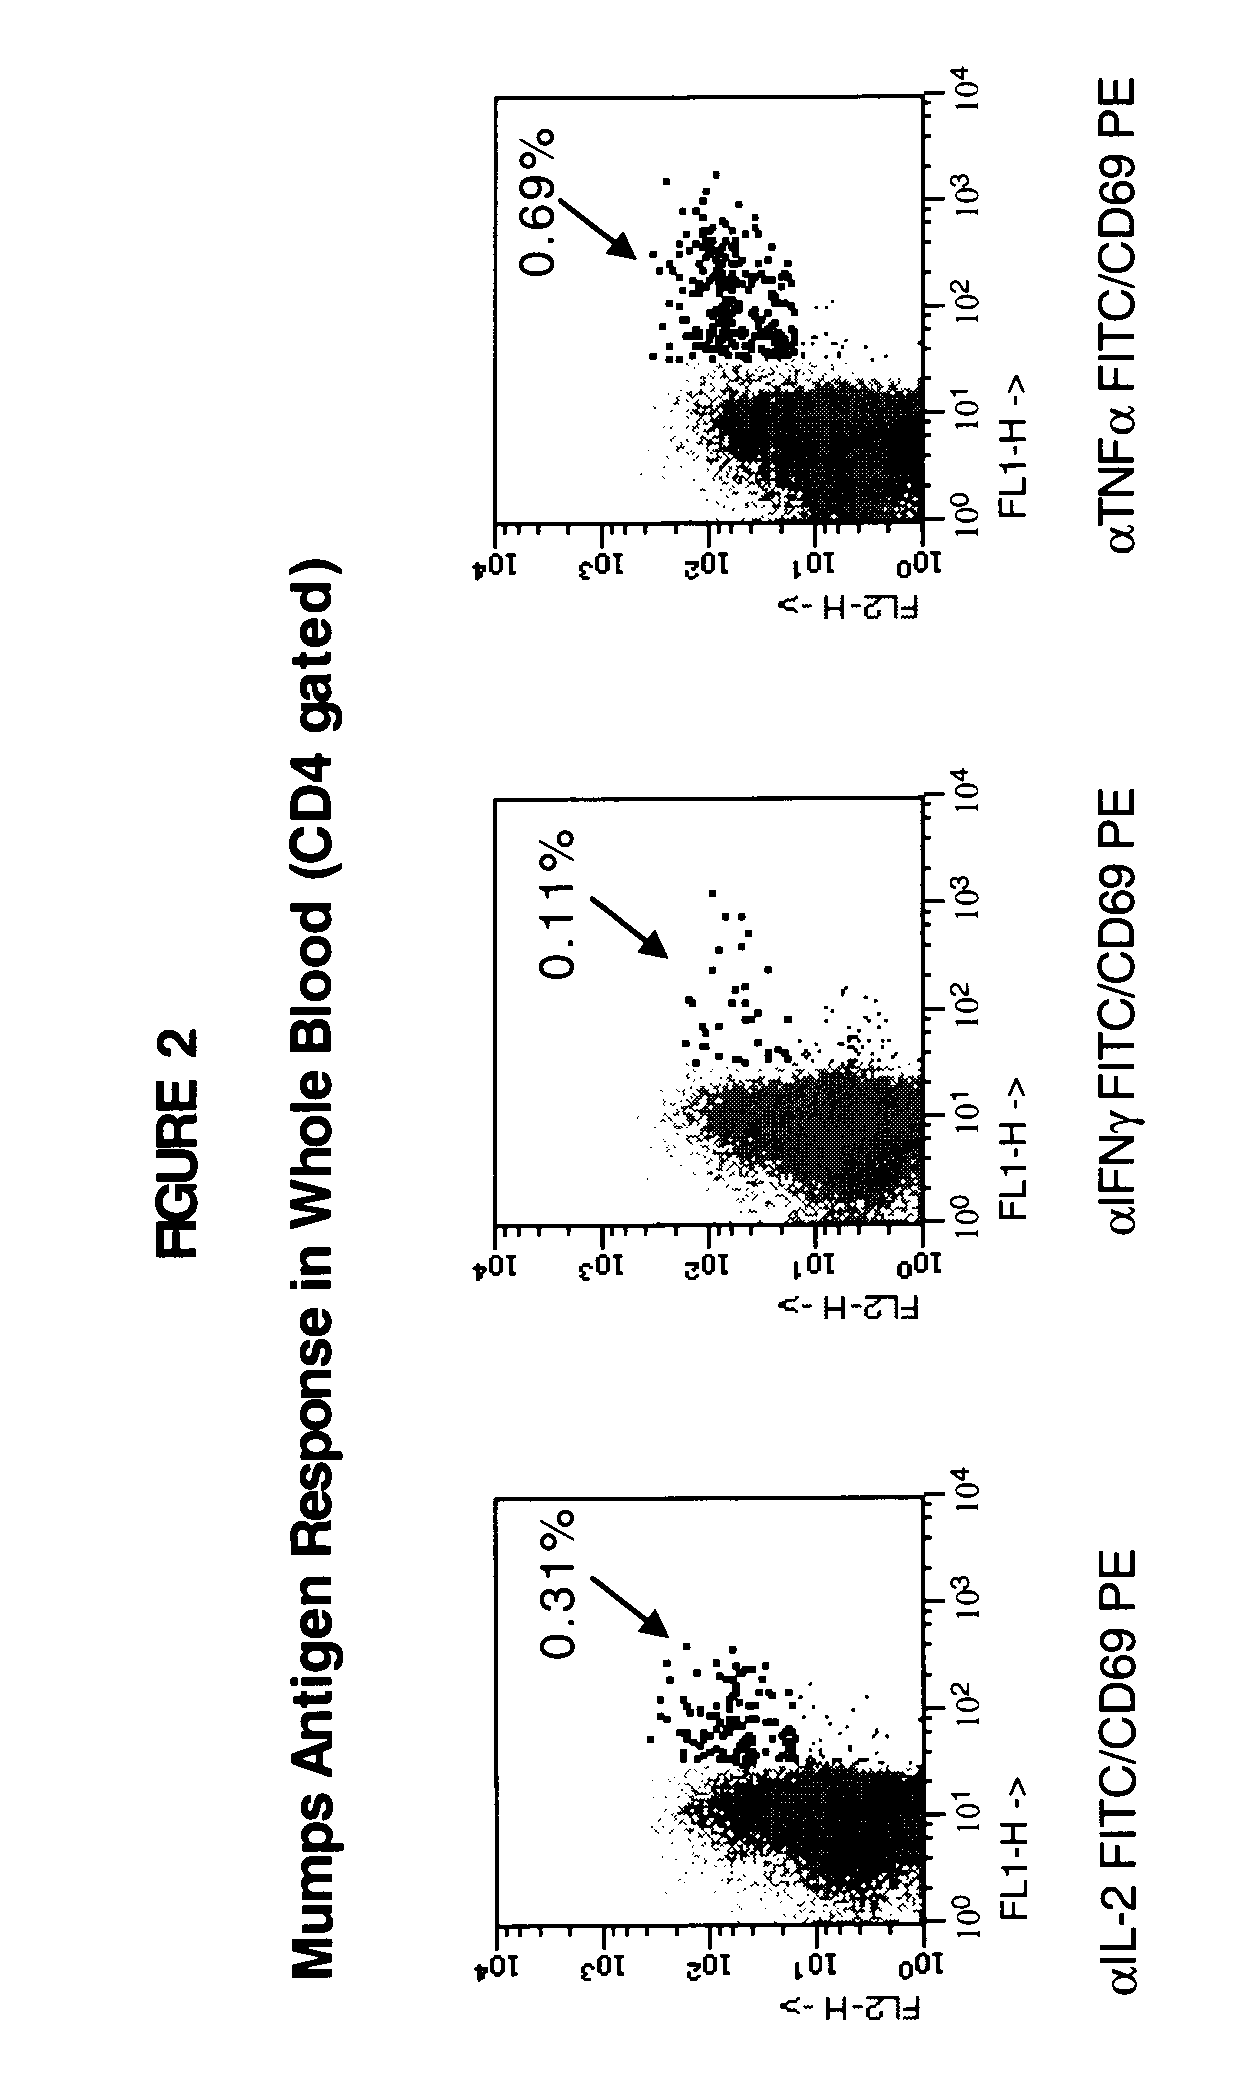 Method for detecting T cell response to specific antigens in whole blood